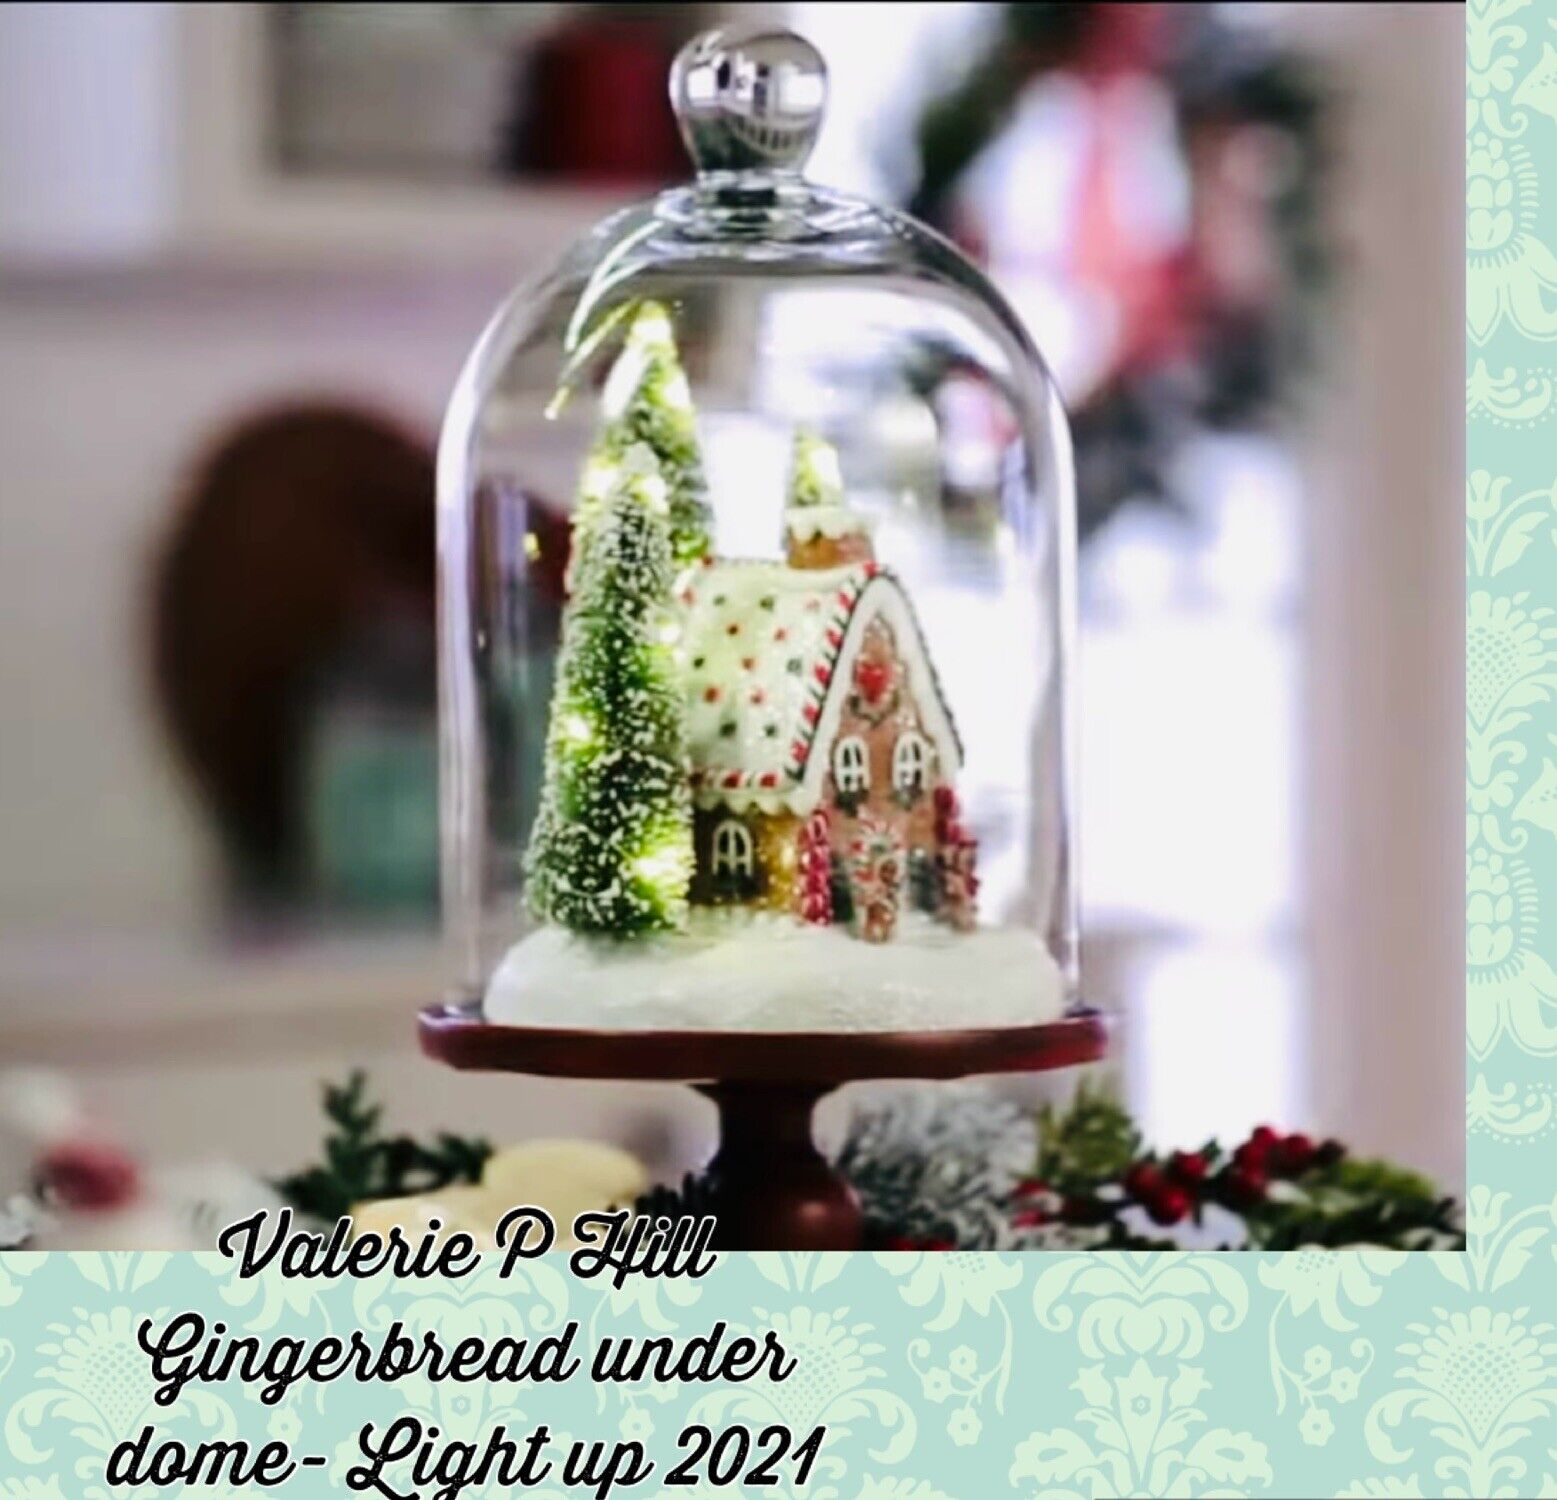 Holiday Gingerbread House Under Dome By Valerie Parr Hill QVC 2021